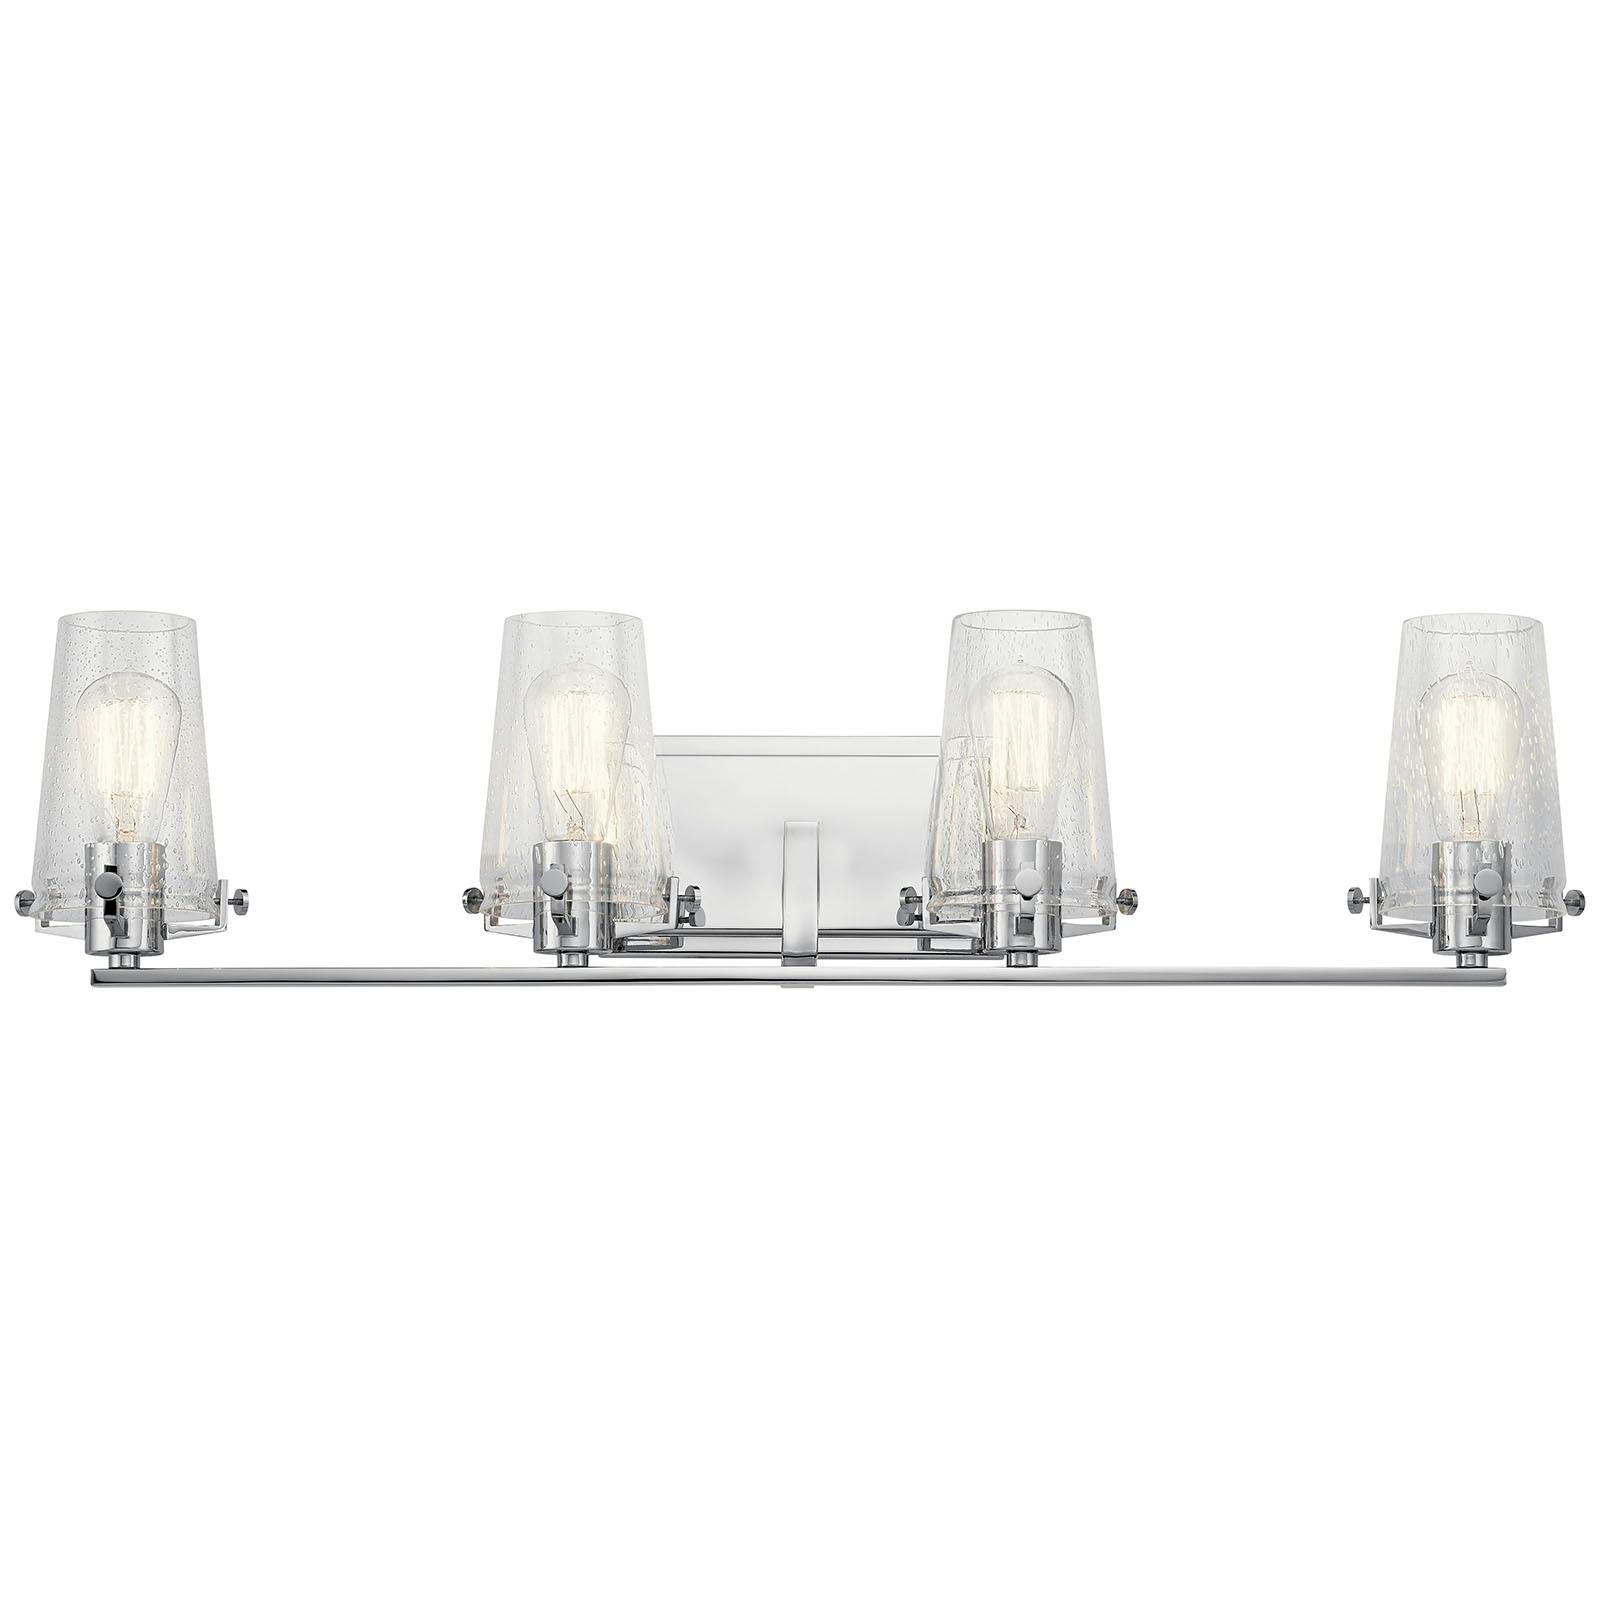 Front view of the Alton 4 Light Vanity Light Chrome on a white background